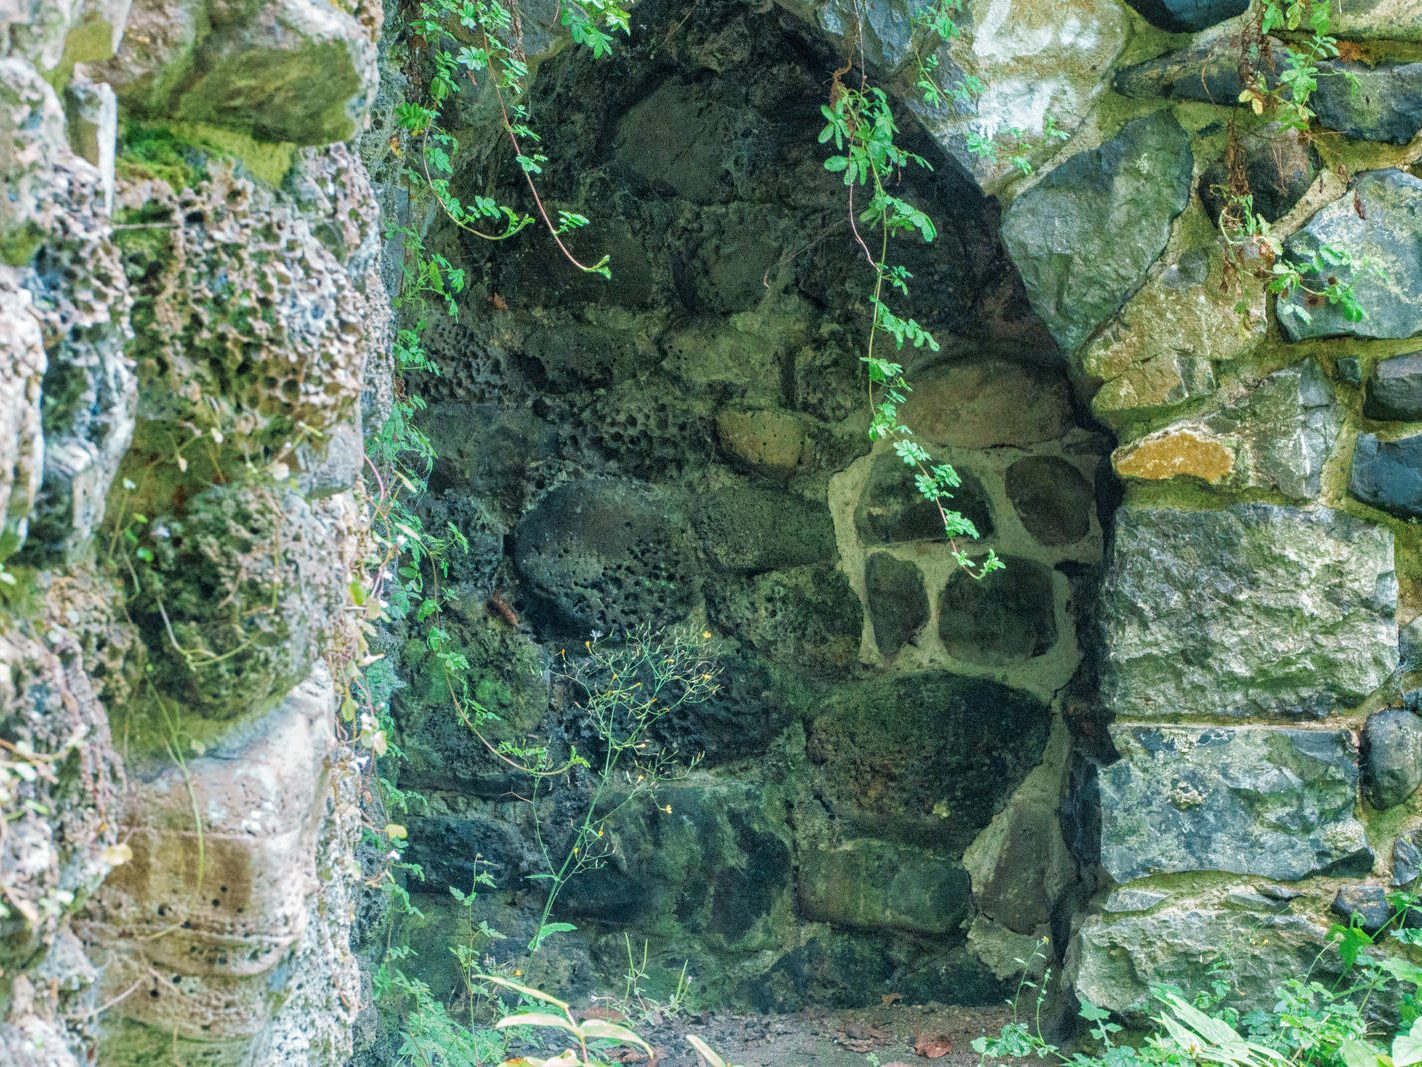 THE HERMIT'S CAVE AND NEARBY [ST ANNE'S PARK IN RAHENY] 012